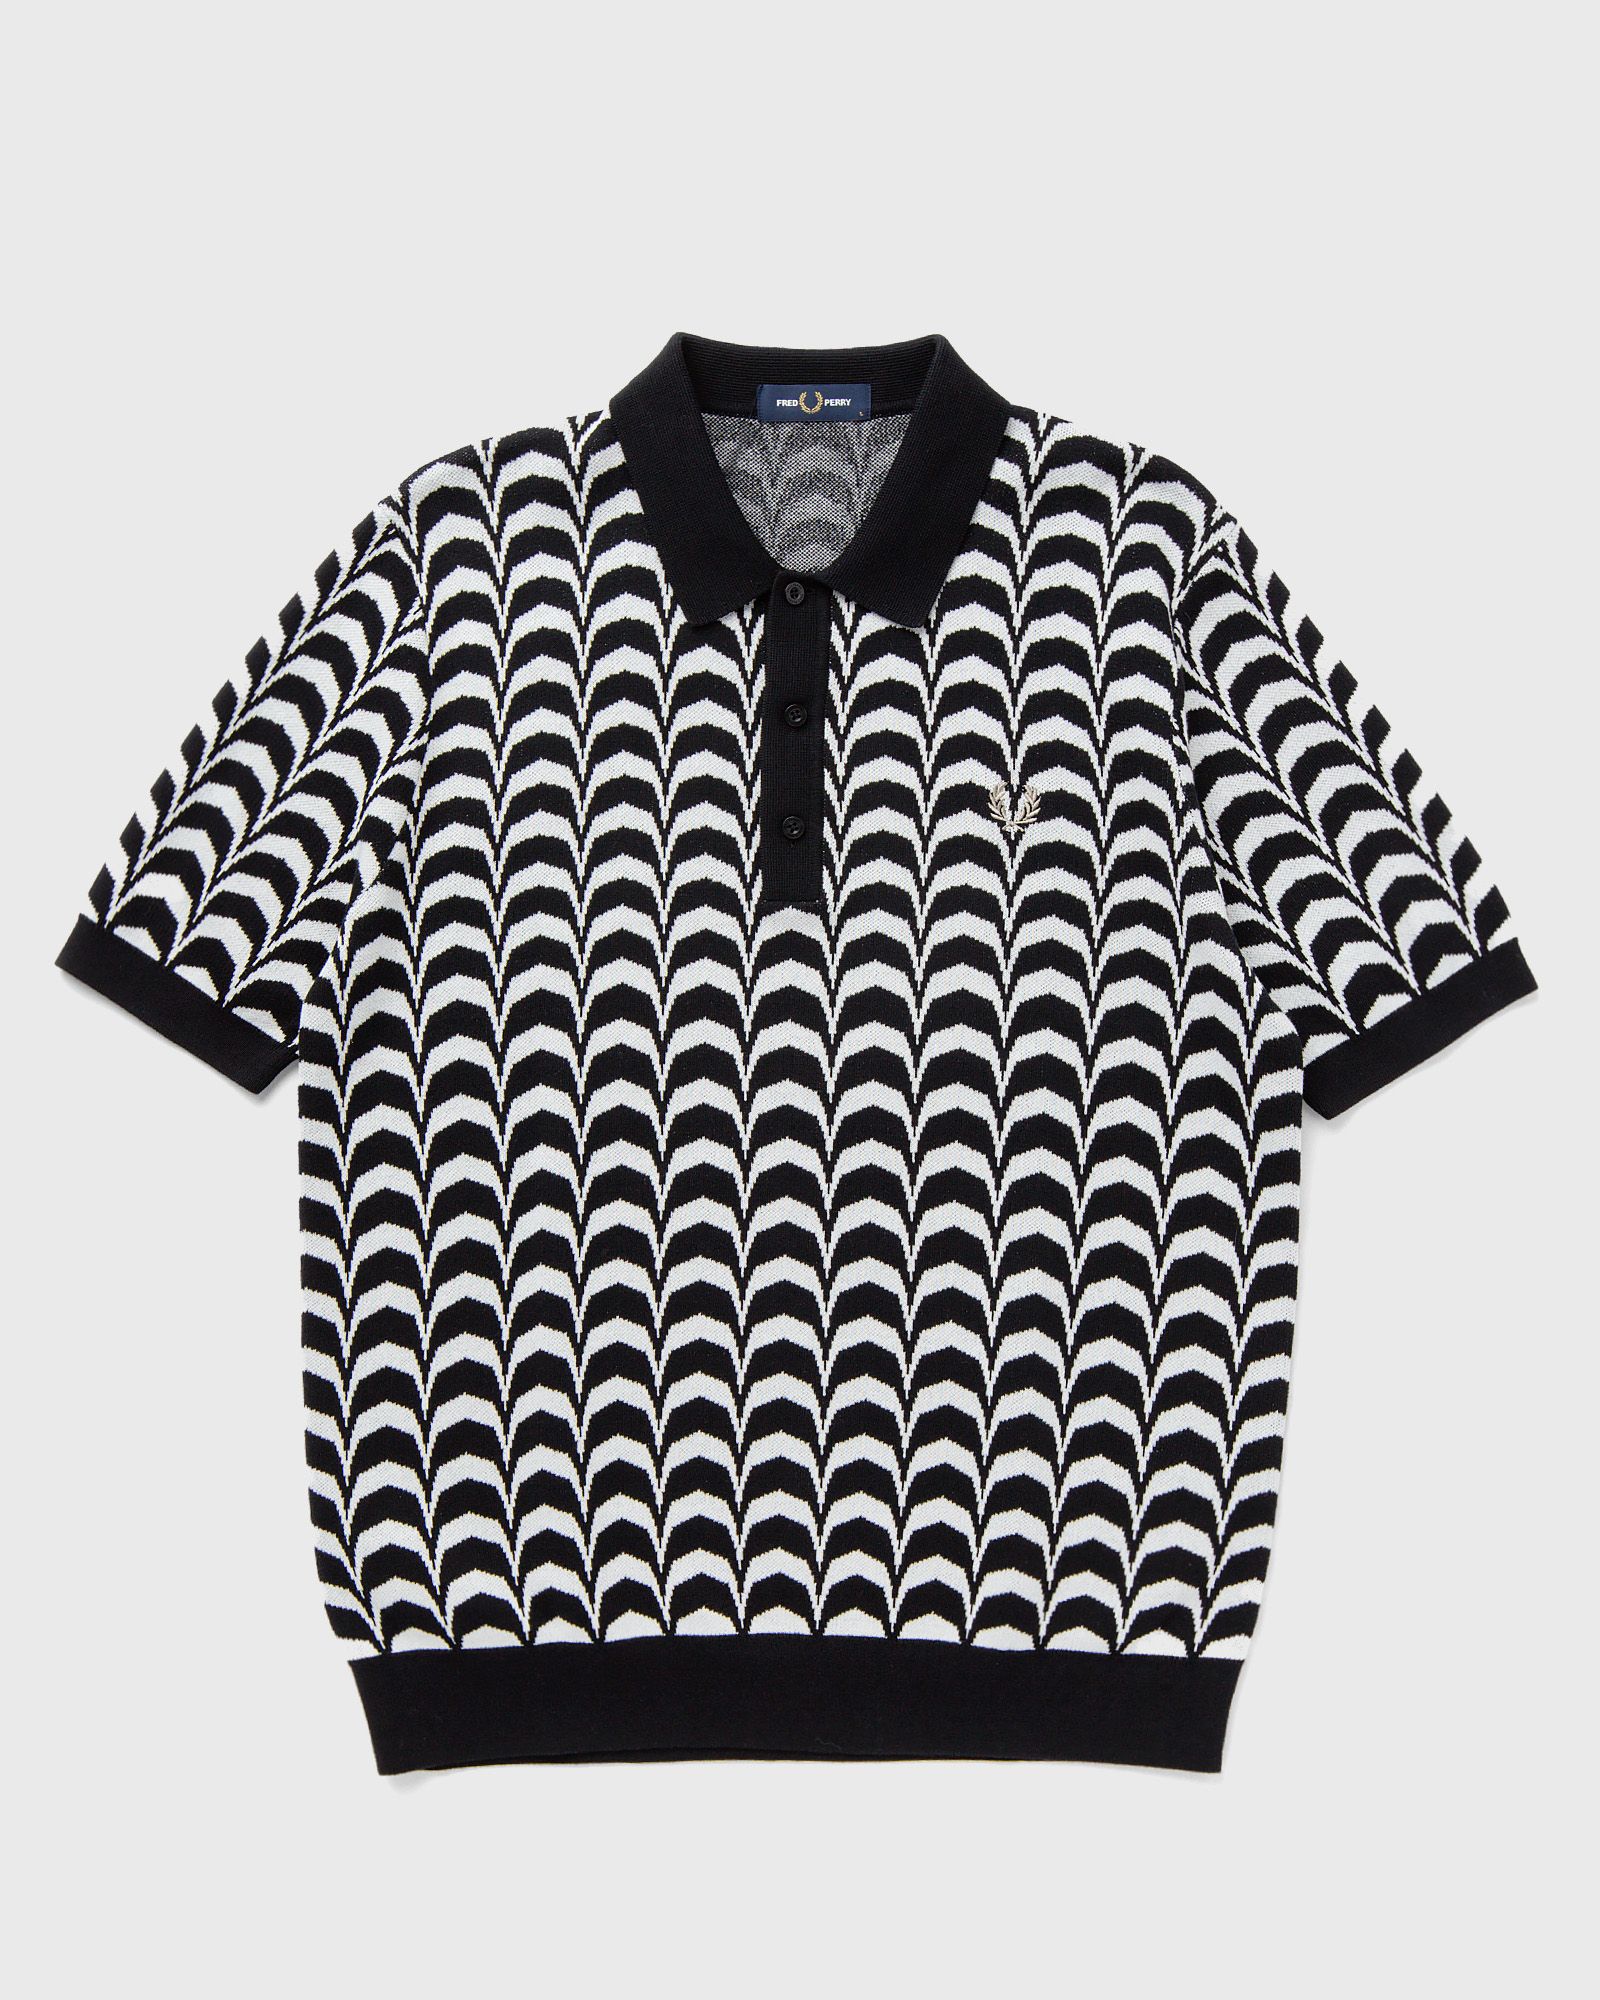 Fred Perry Jacquard Knitted Shirt men Polos black|white in Größe:L von Fred Perry